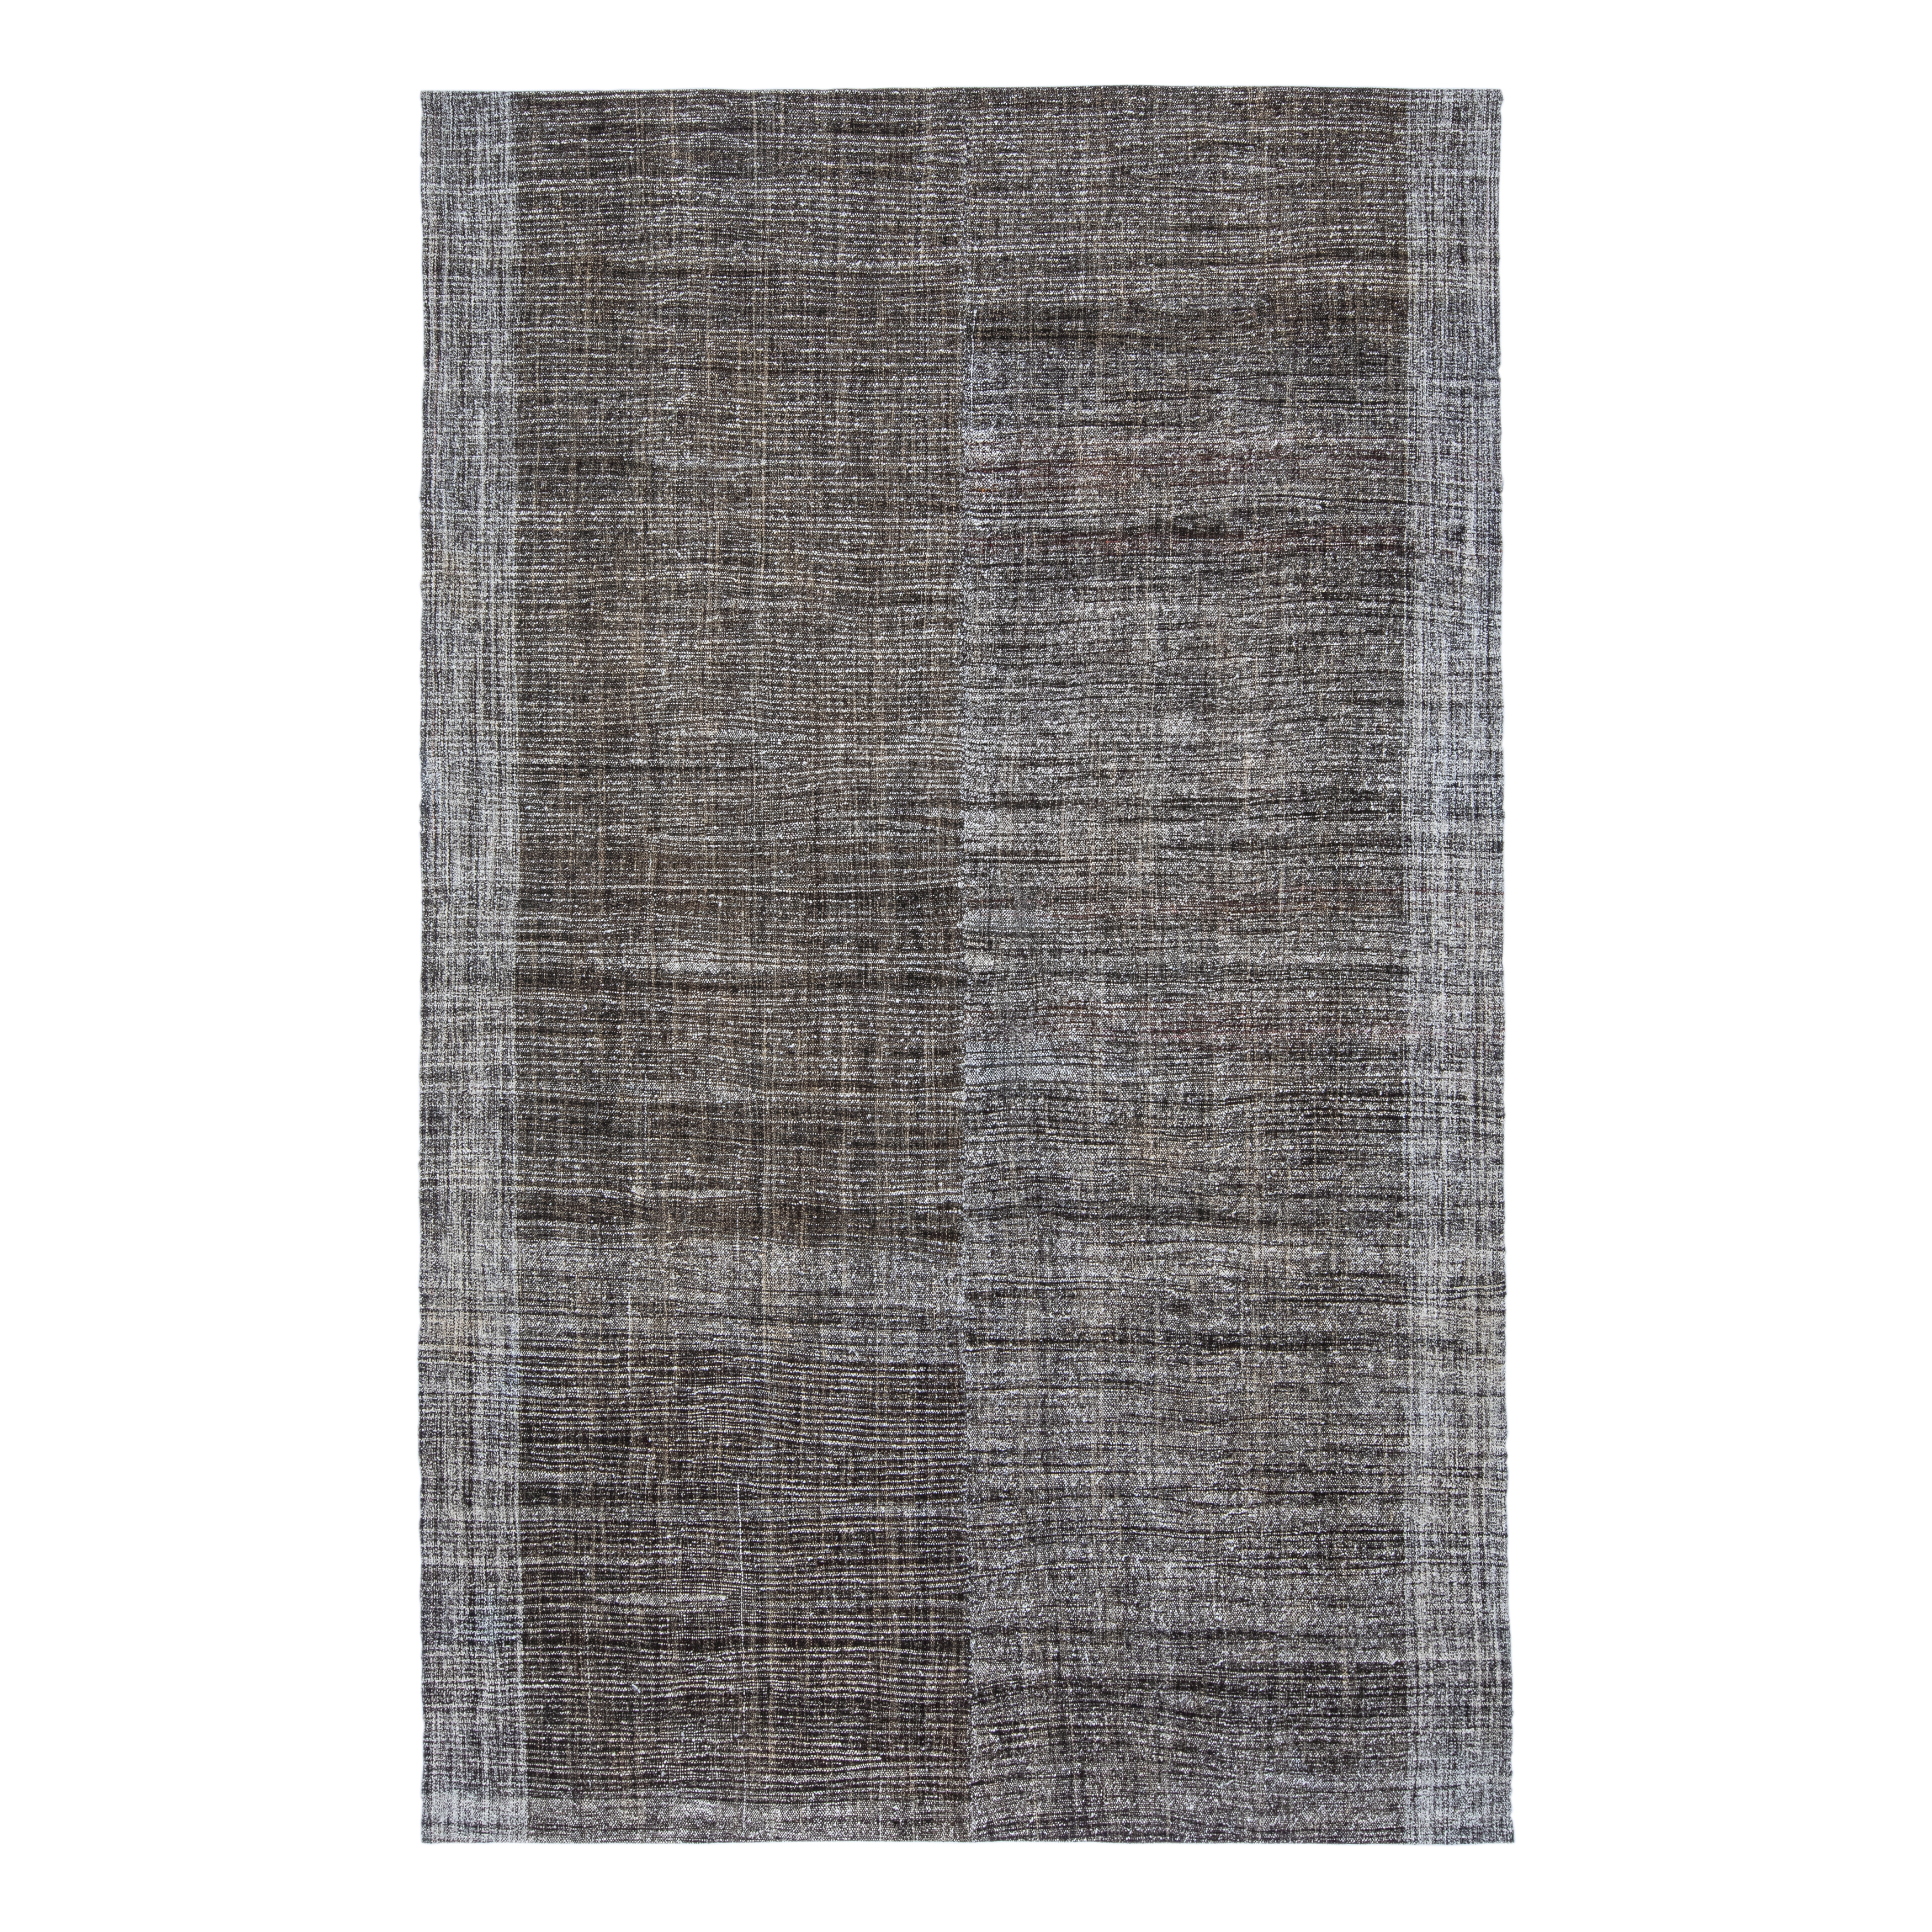 This Vintage Flatweave is handwoven and made of wool and cotton.